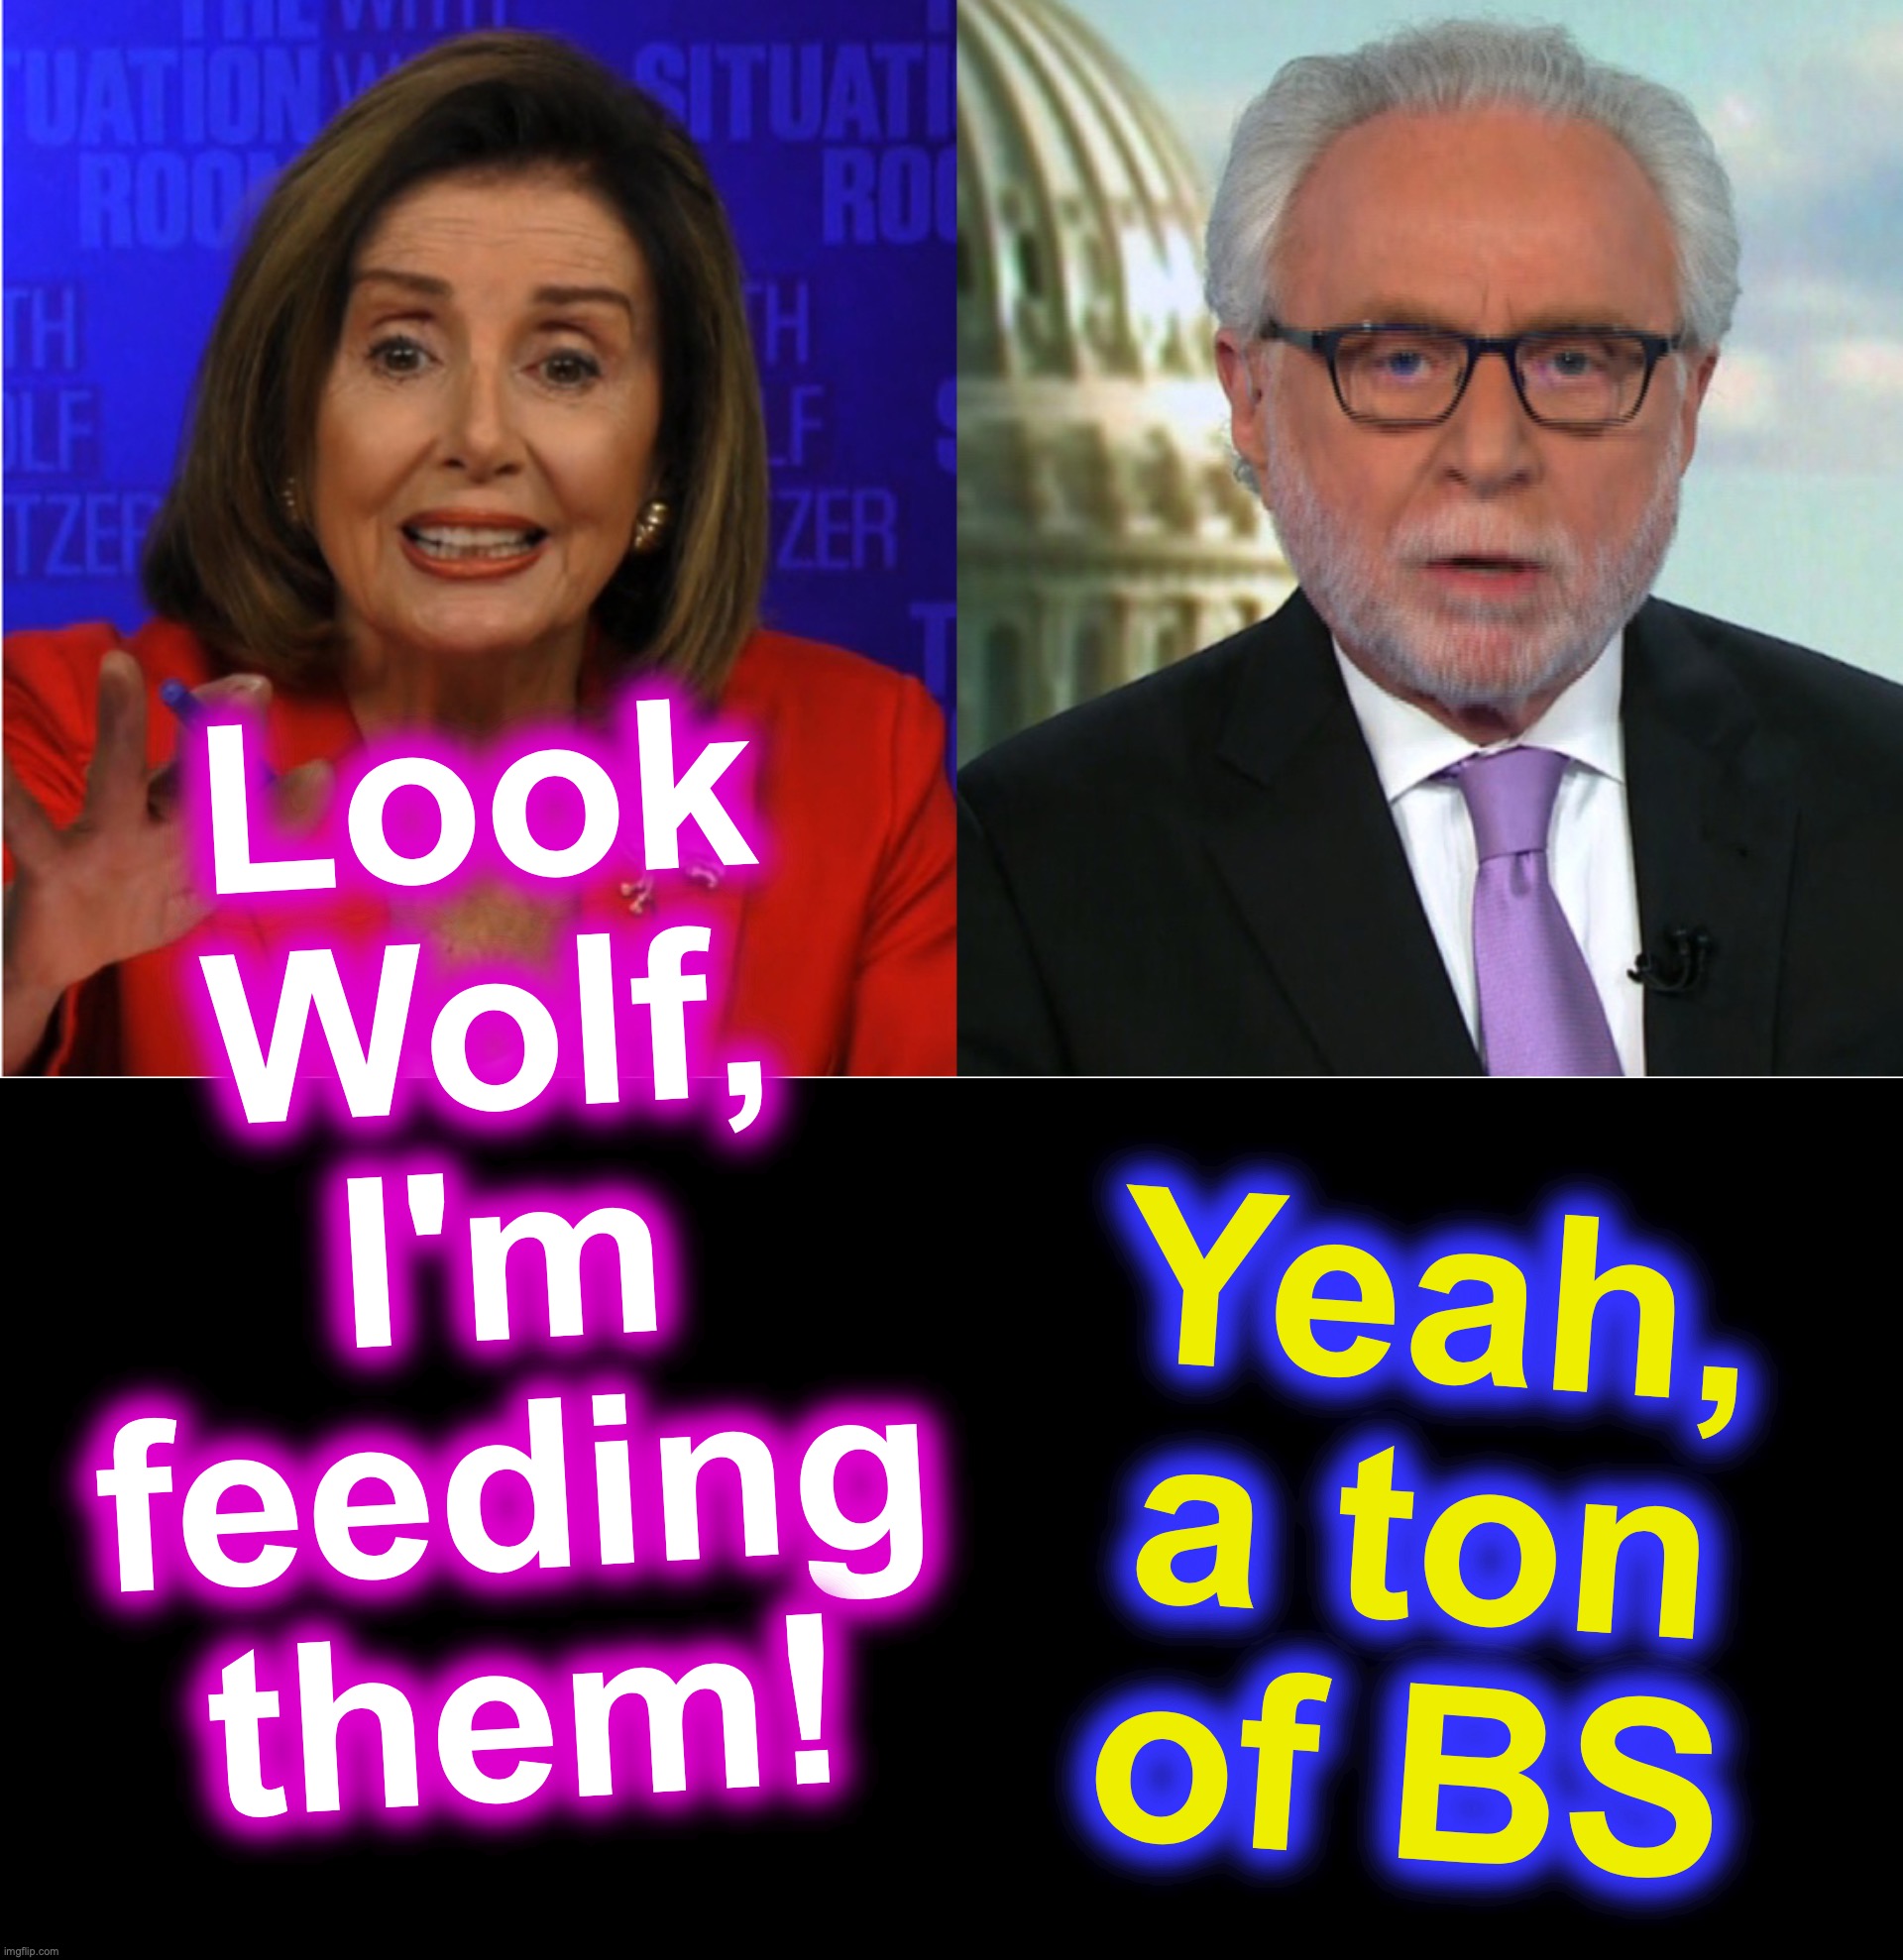 Yeah, a ton of BS; Look Wolf, I'm feeding them! | image tagged in nancy pelosi,wolf | made w/ Imgflip meme maker